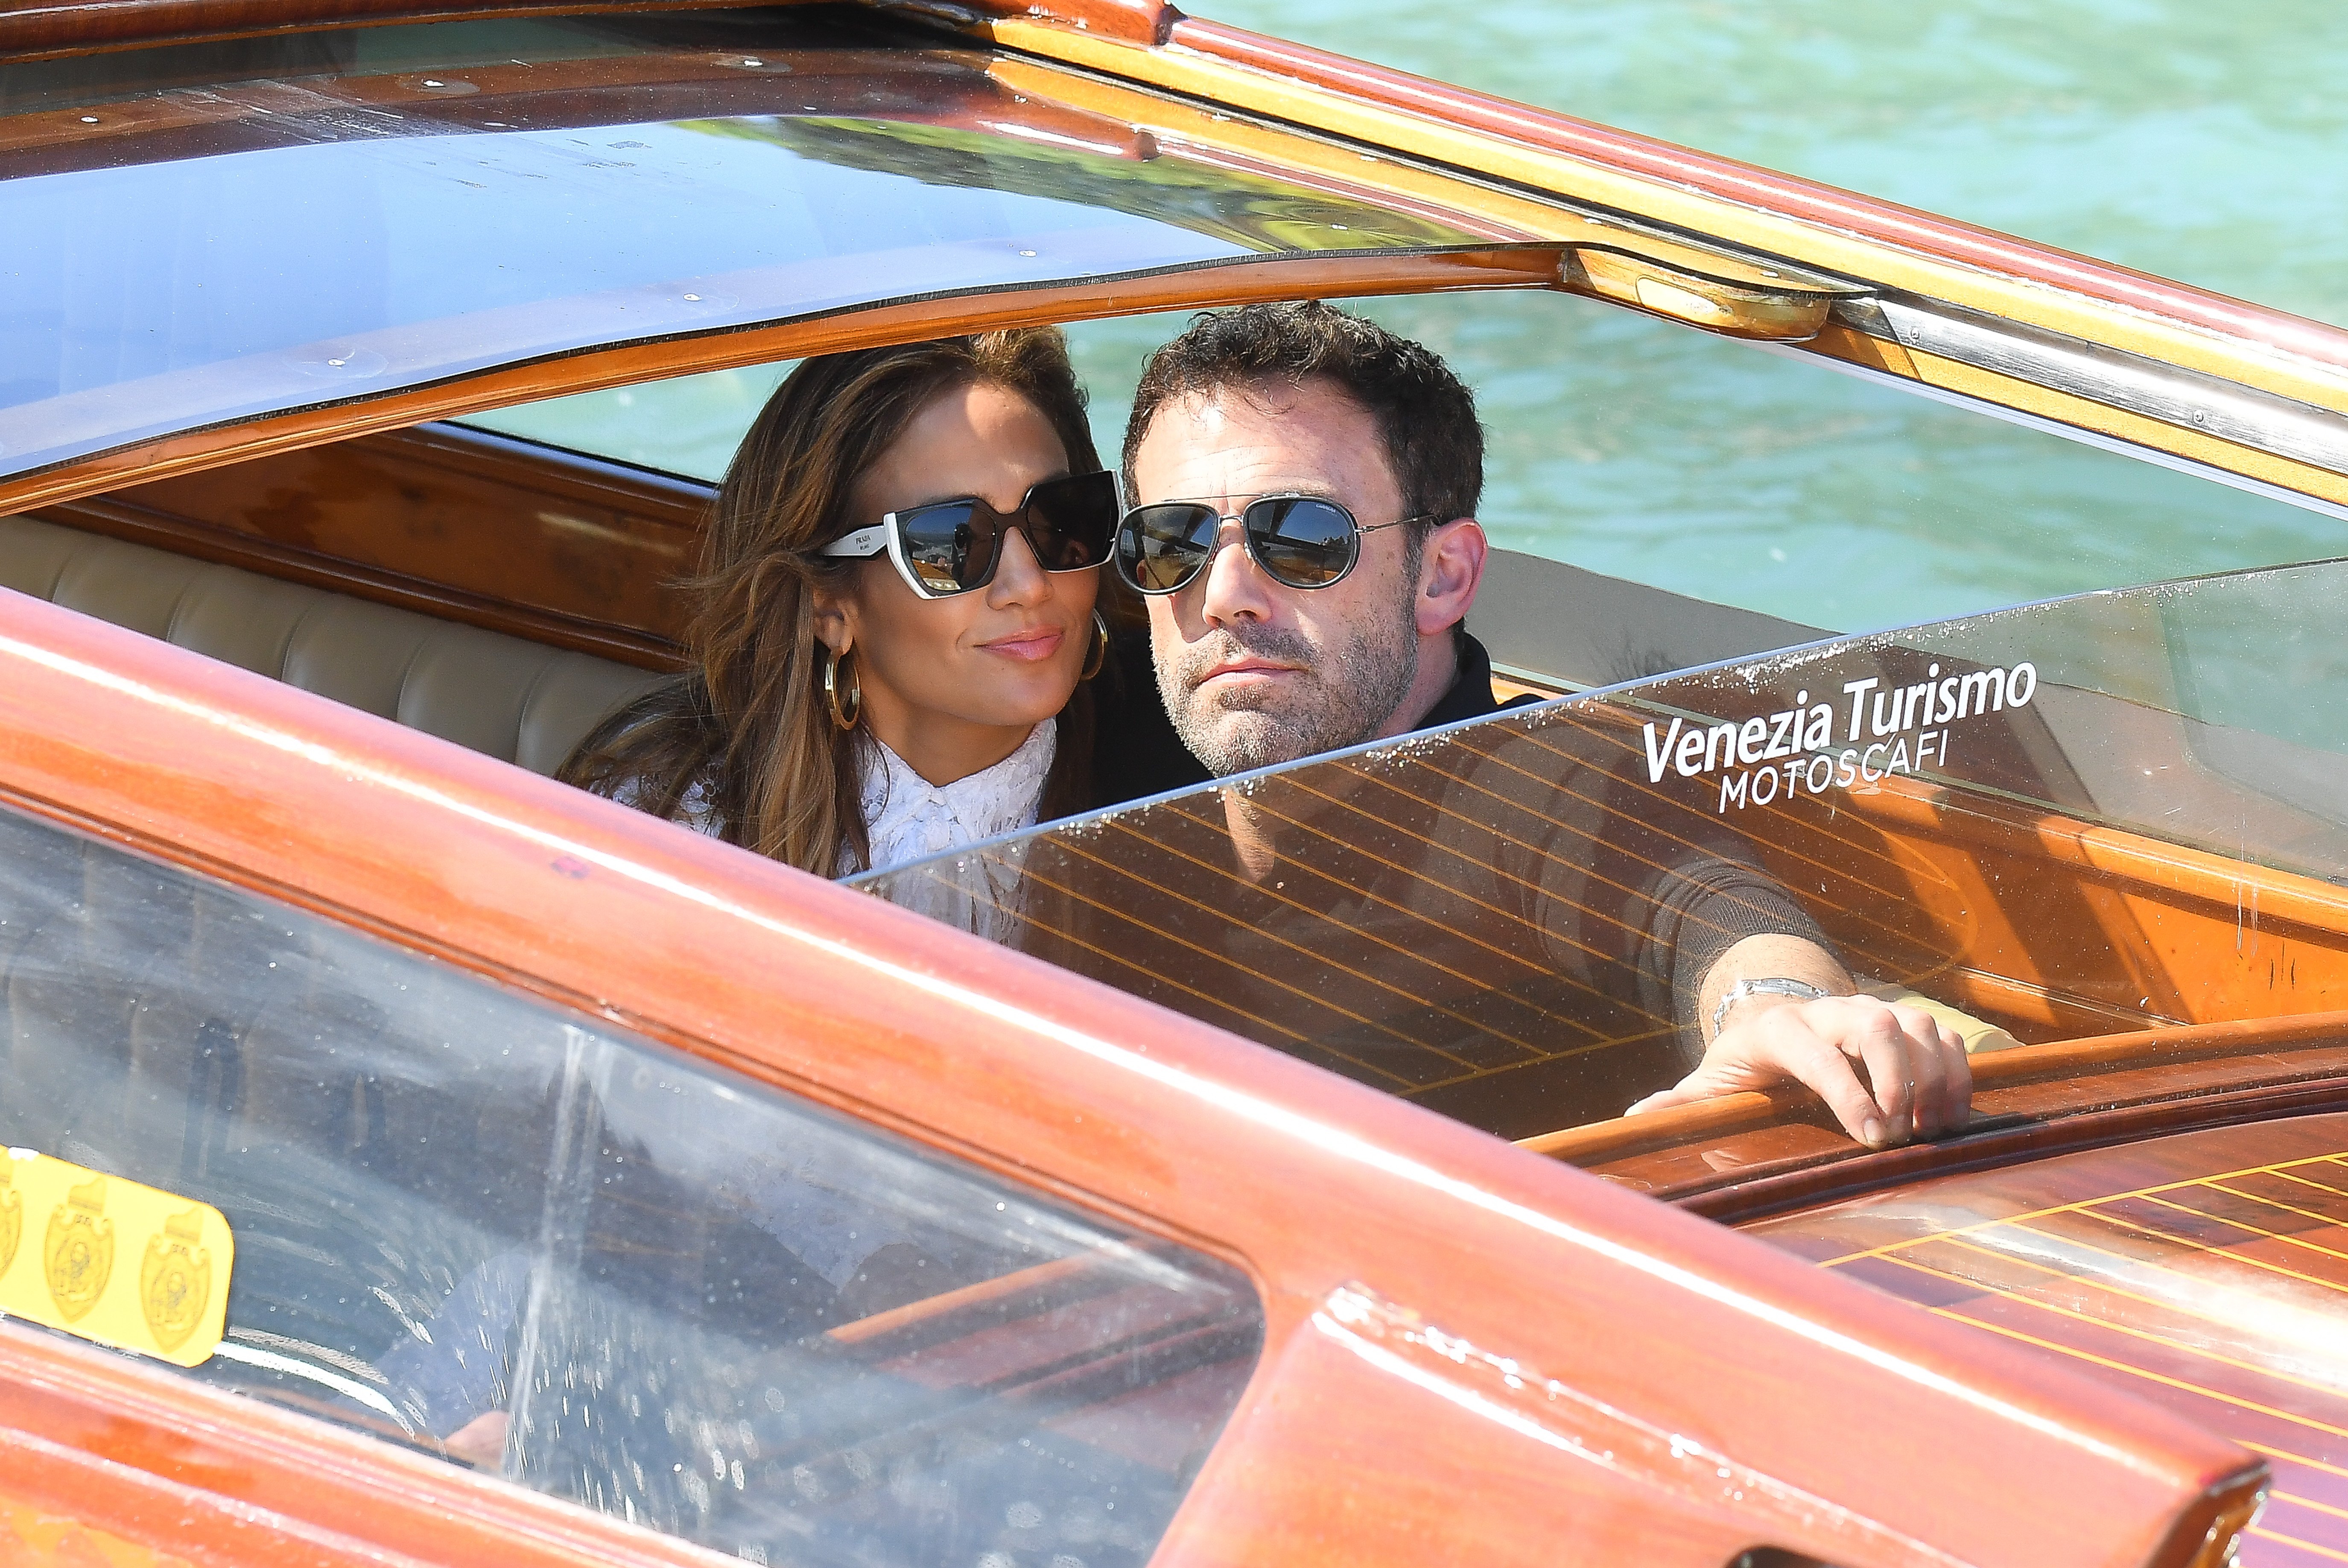 Jennifer Lopez and Ben Affleck at the 78th Venice International Film Festival on September 9, 2021, in Venice, Italy. | Source: Jacopo Raule/Getty Images